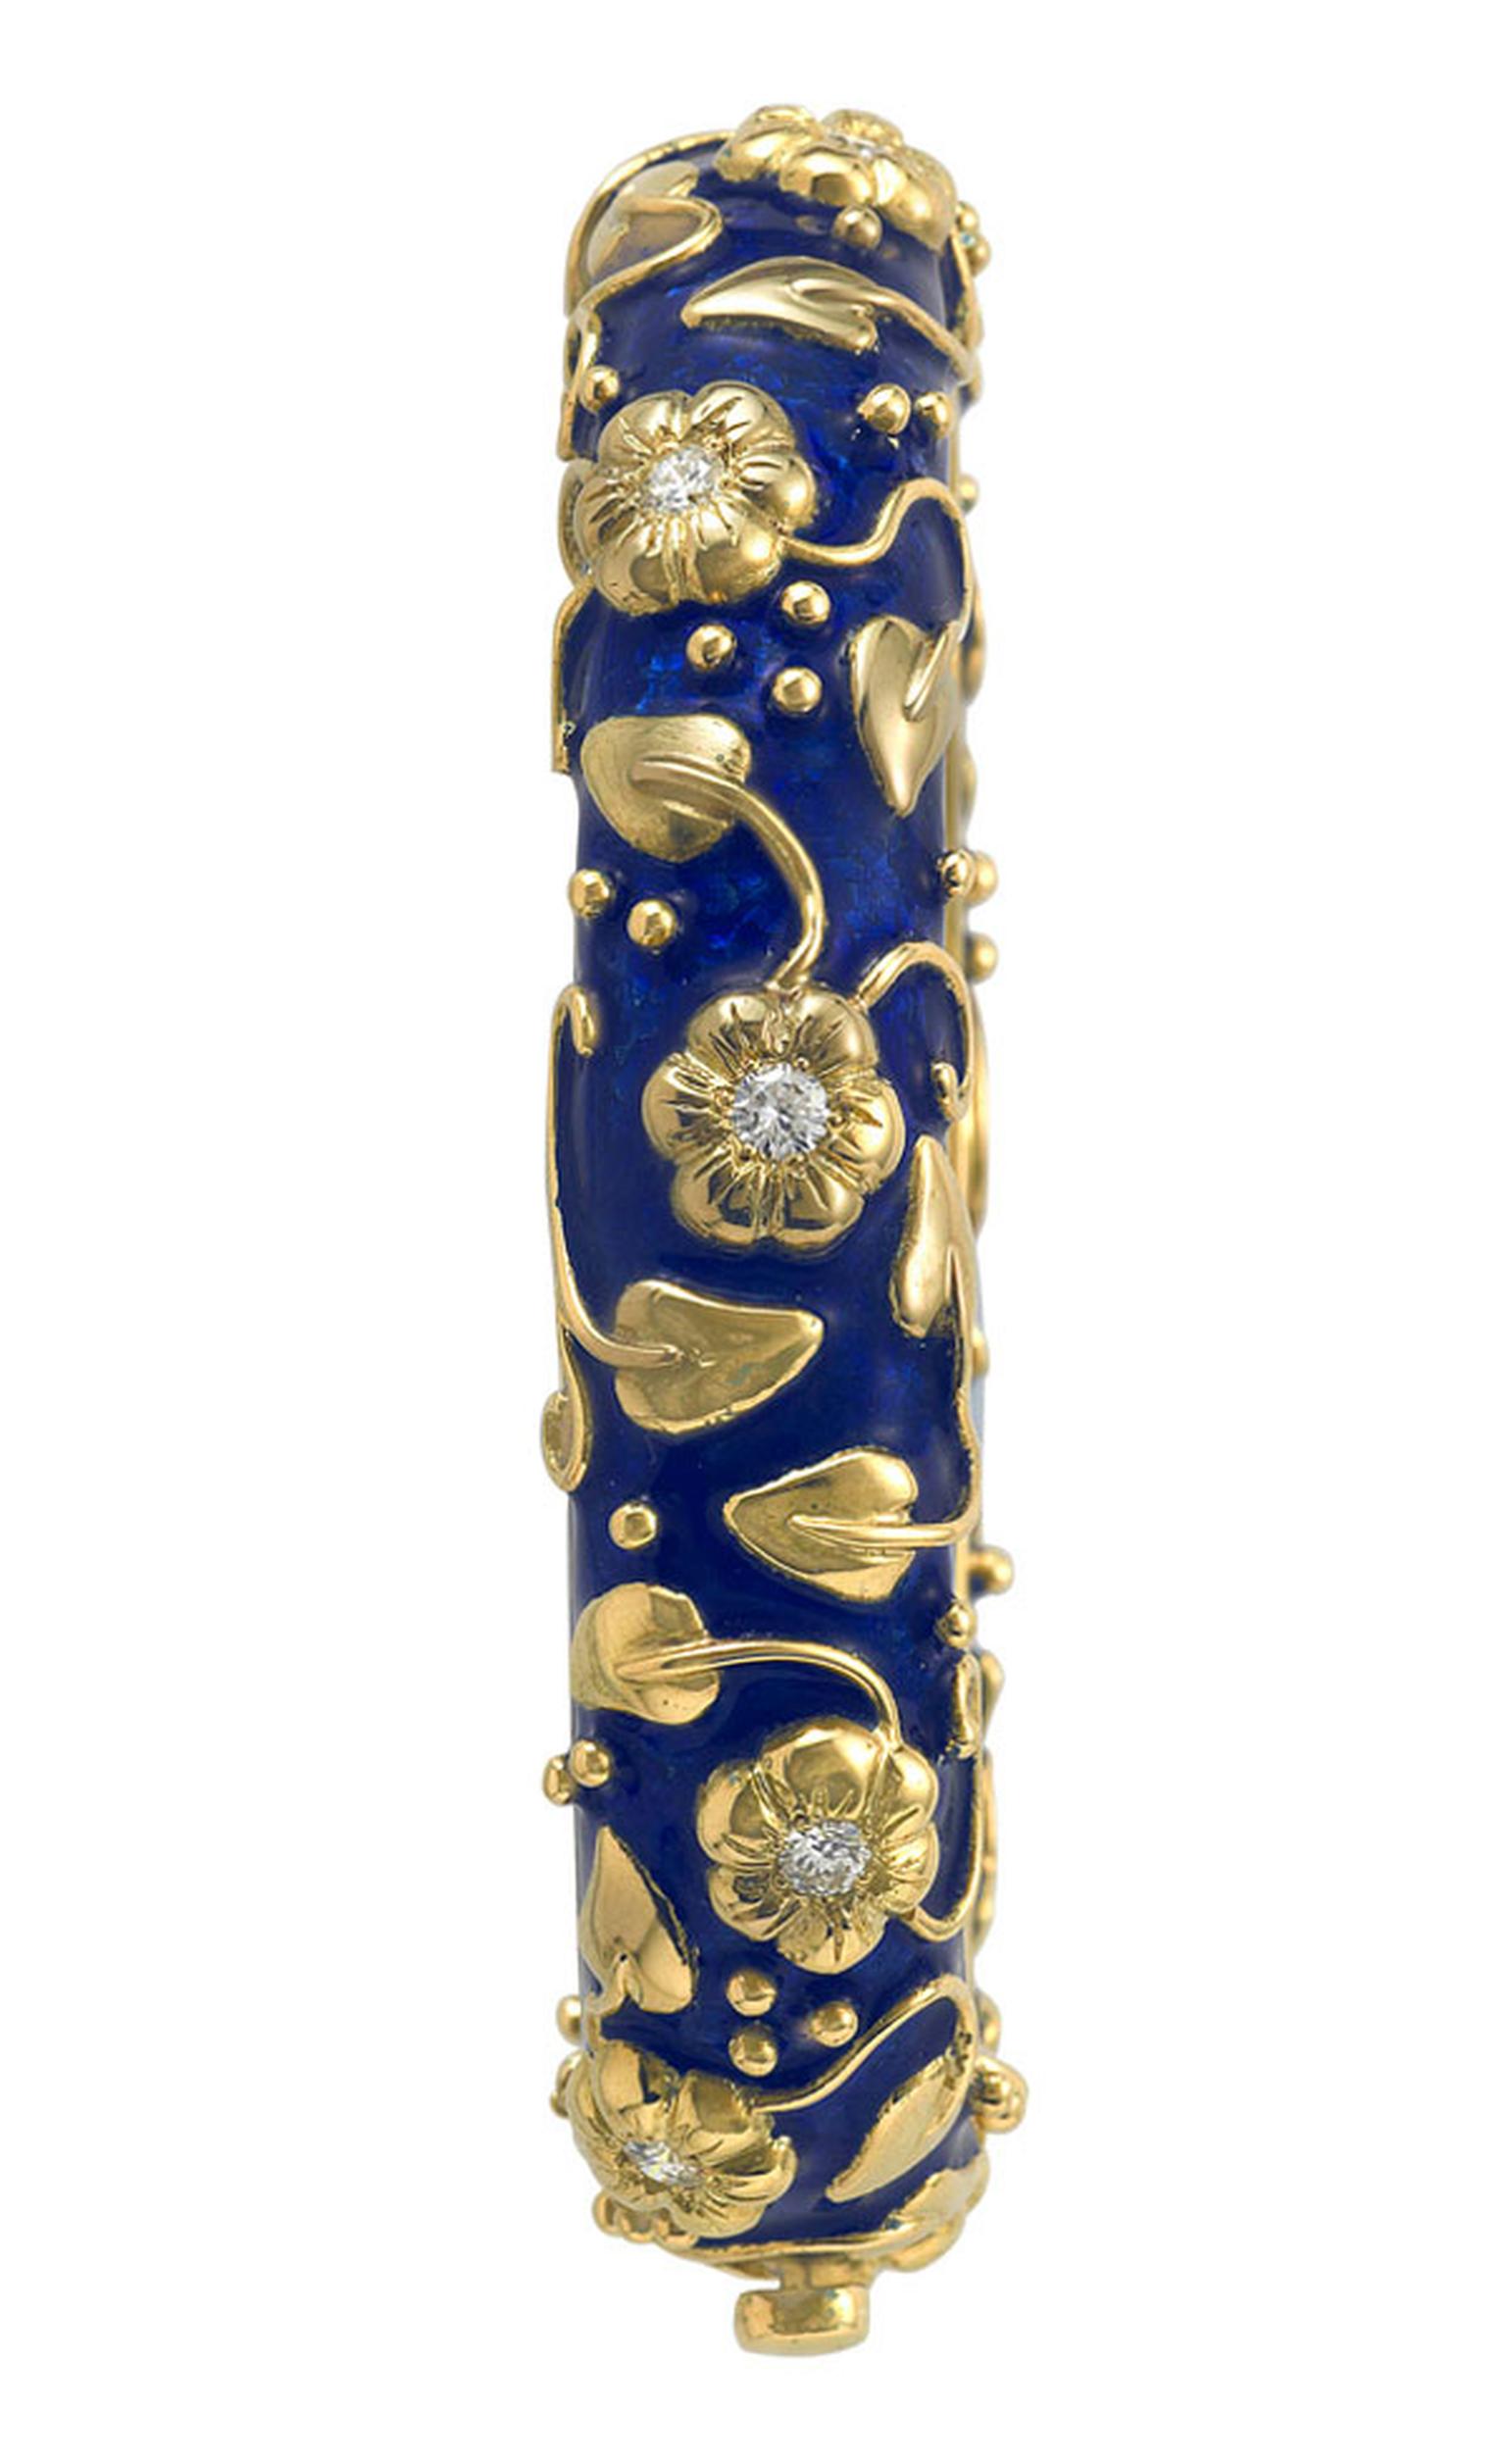 ELIZABETH GAGE, Royal Blue Bangle decorated with gold flower motifs set diamonds, gold carved leaves, twining stems and bead detail. POA